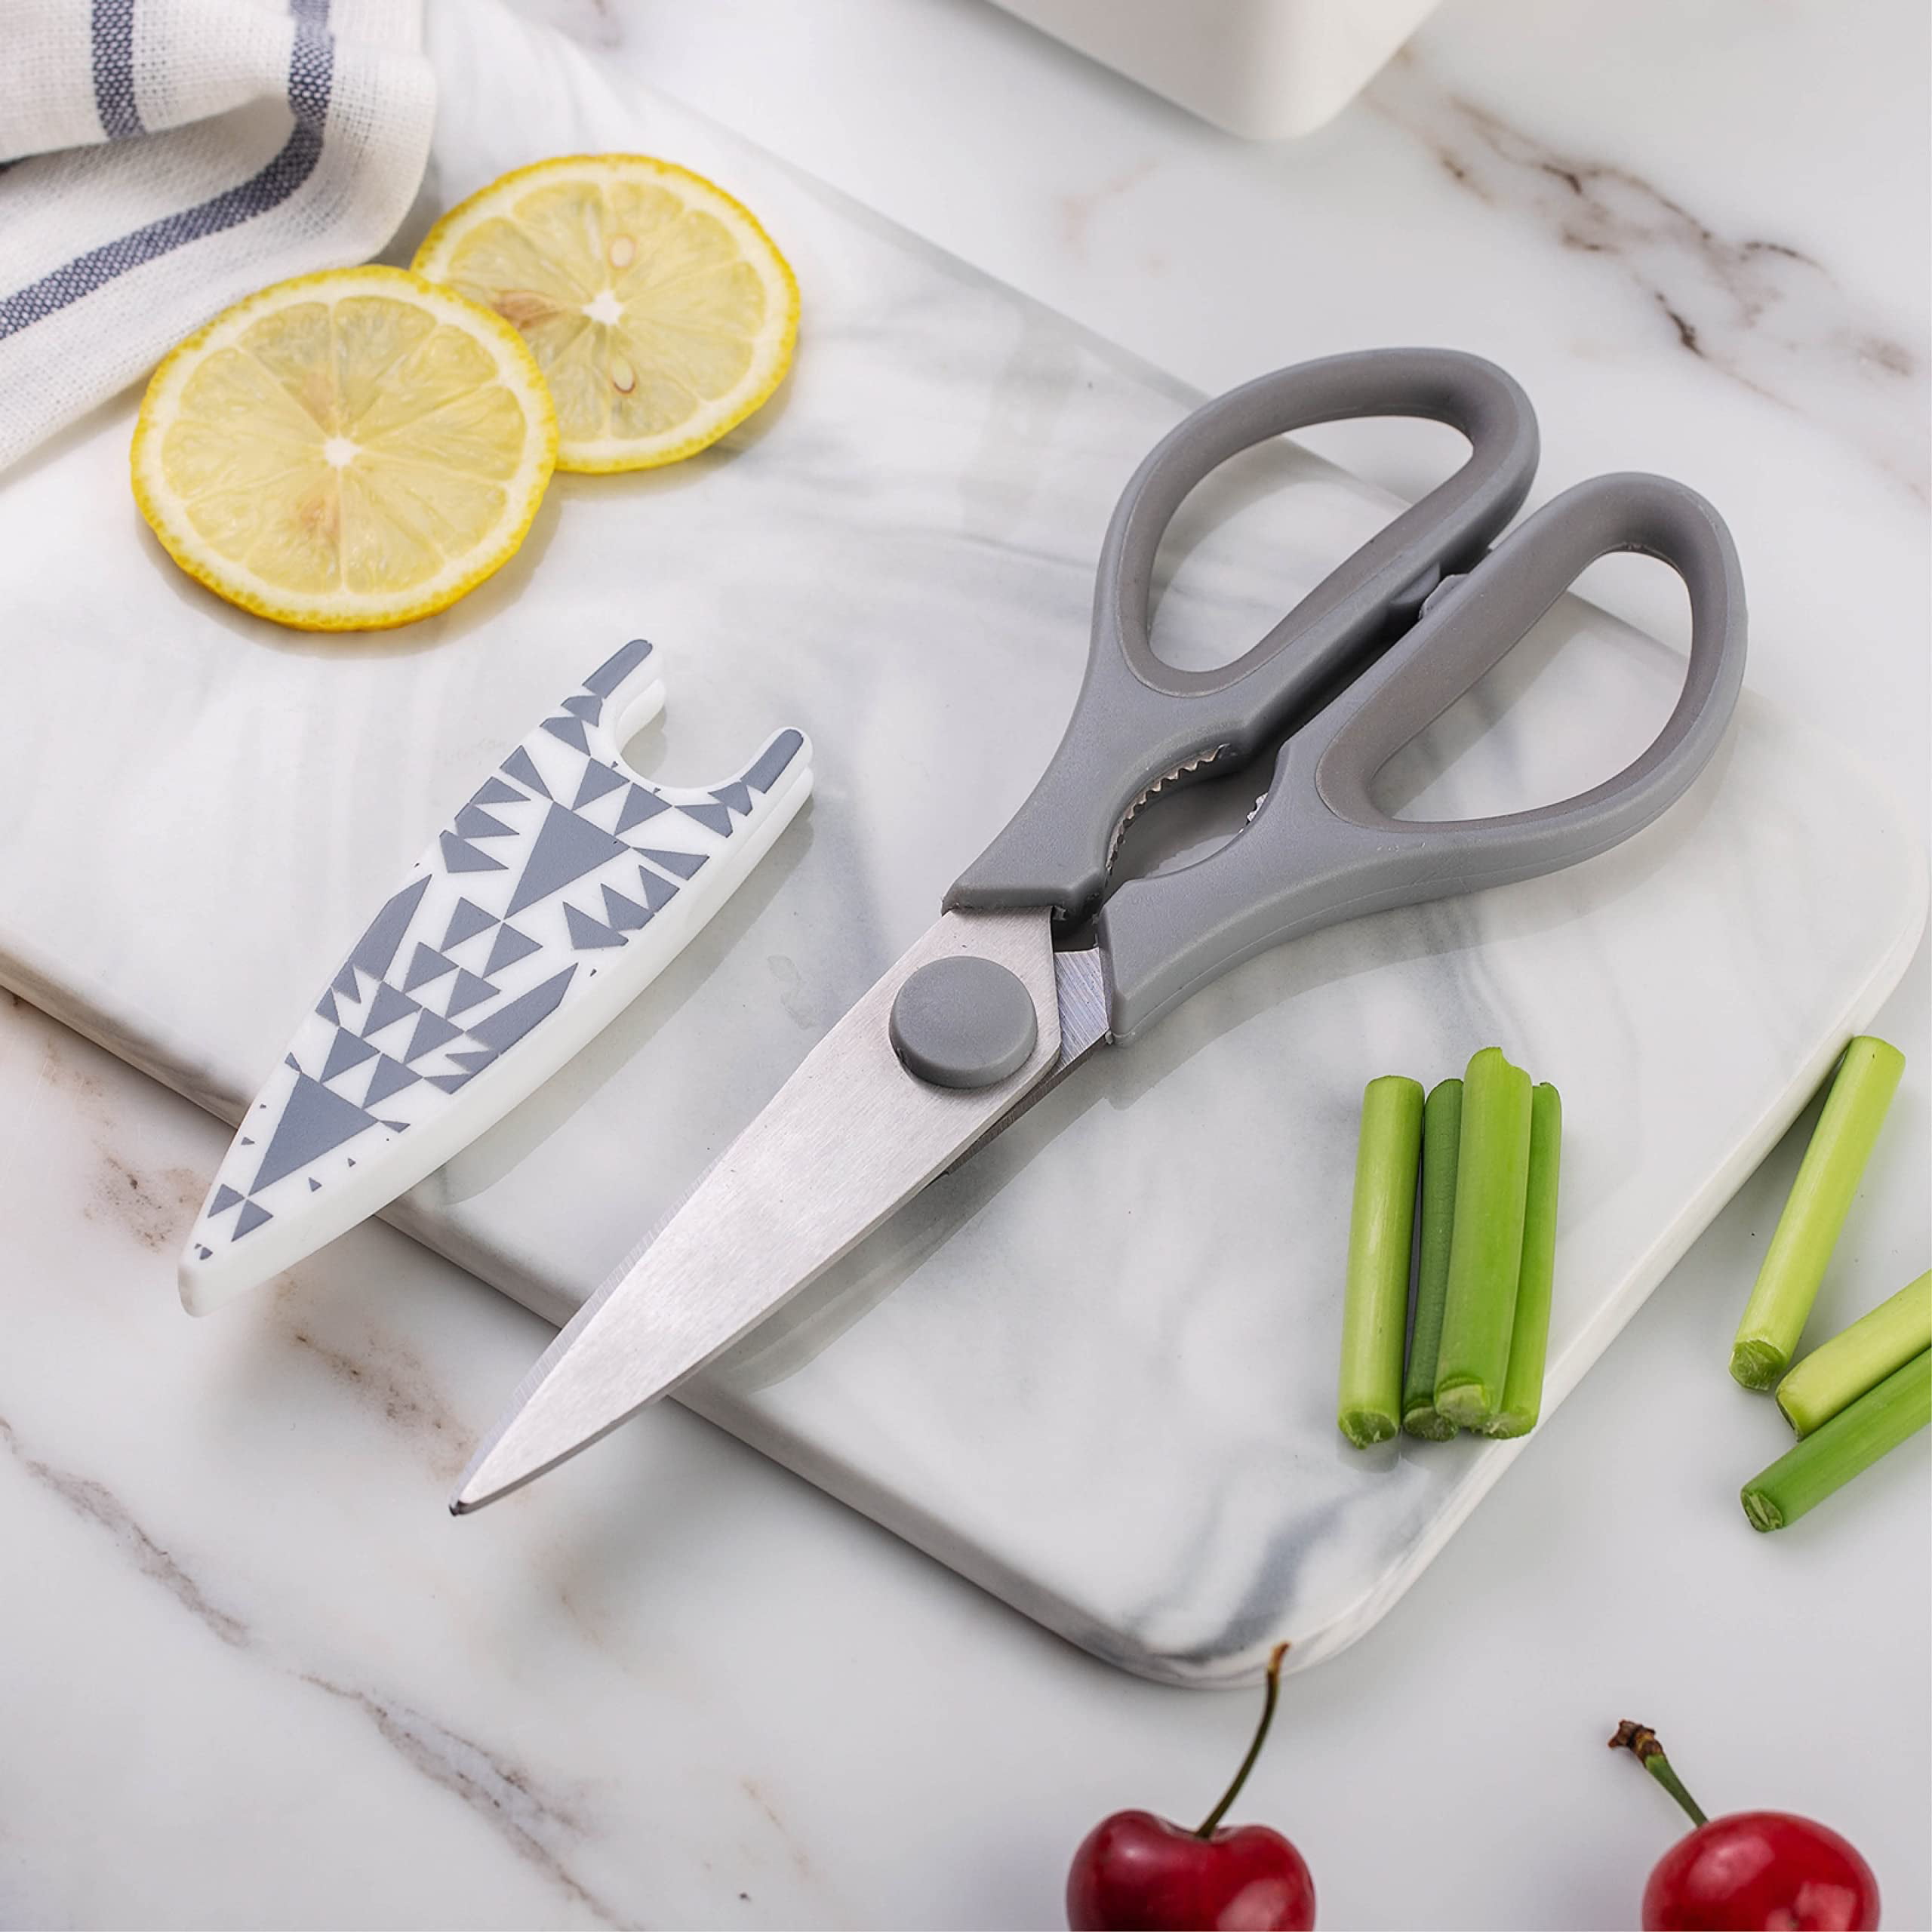 Chicago Cutlery 2-Pack Soft Grip Kitchen Scissors Shears With Bottle  Opener, All Purpose Stainless Steel Utility Scissors, For Everyday Kitchen  Office